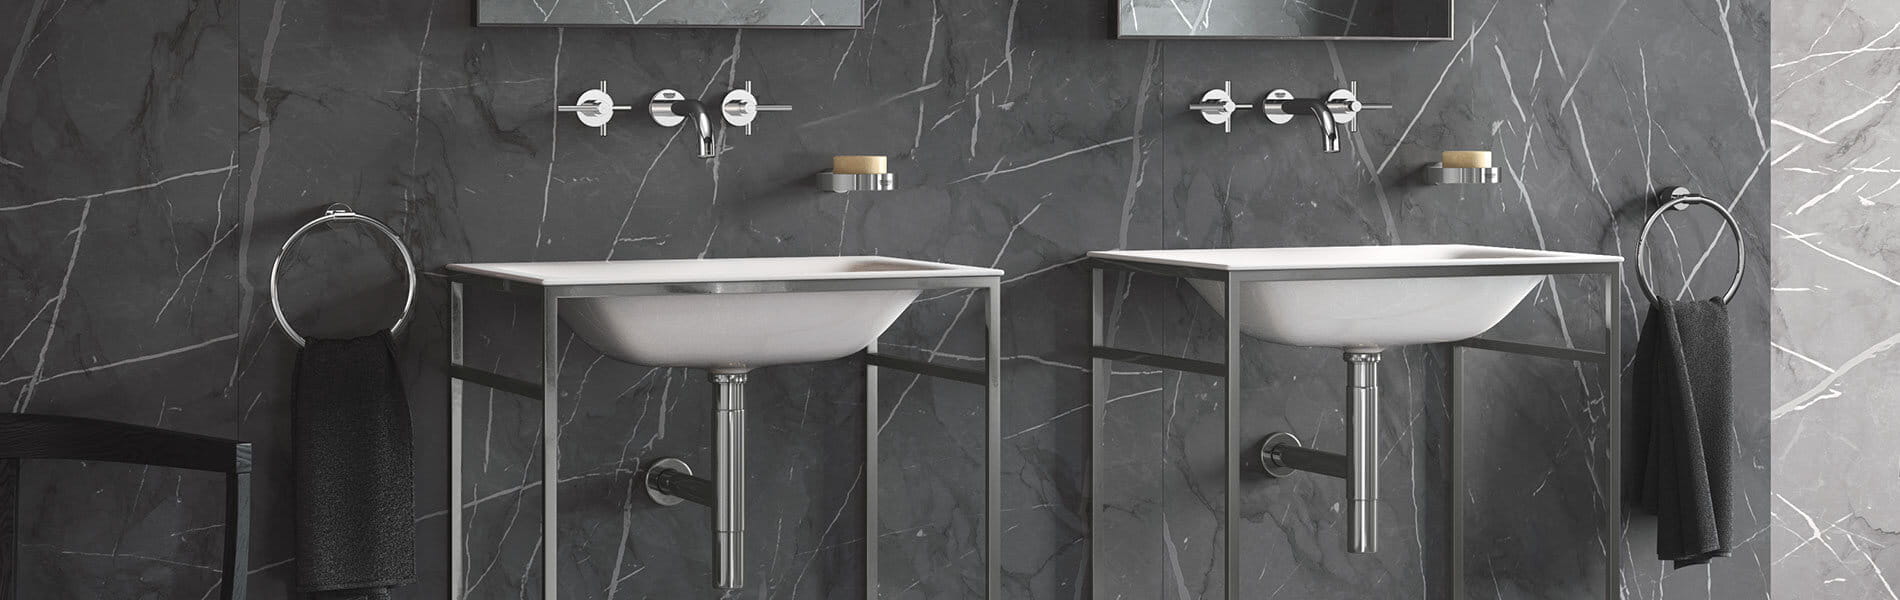 GROHE Modern Bathroom with Wall Mount Faucets